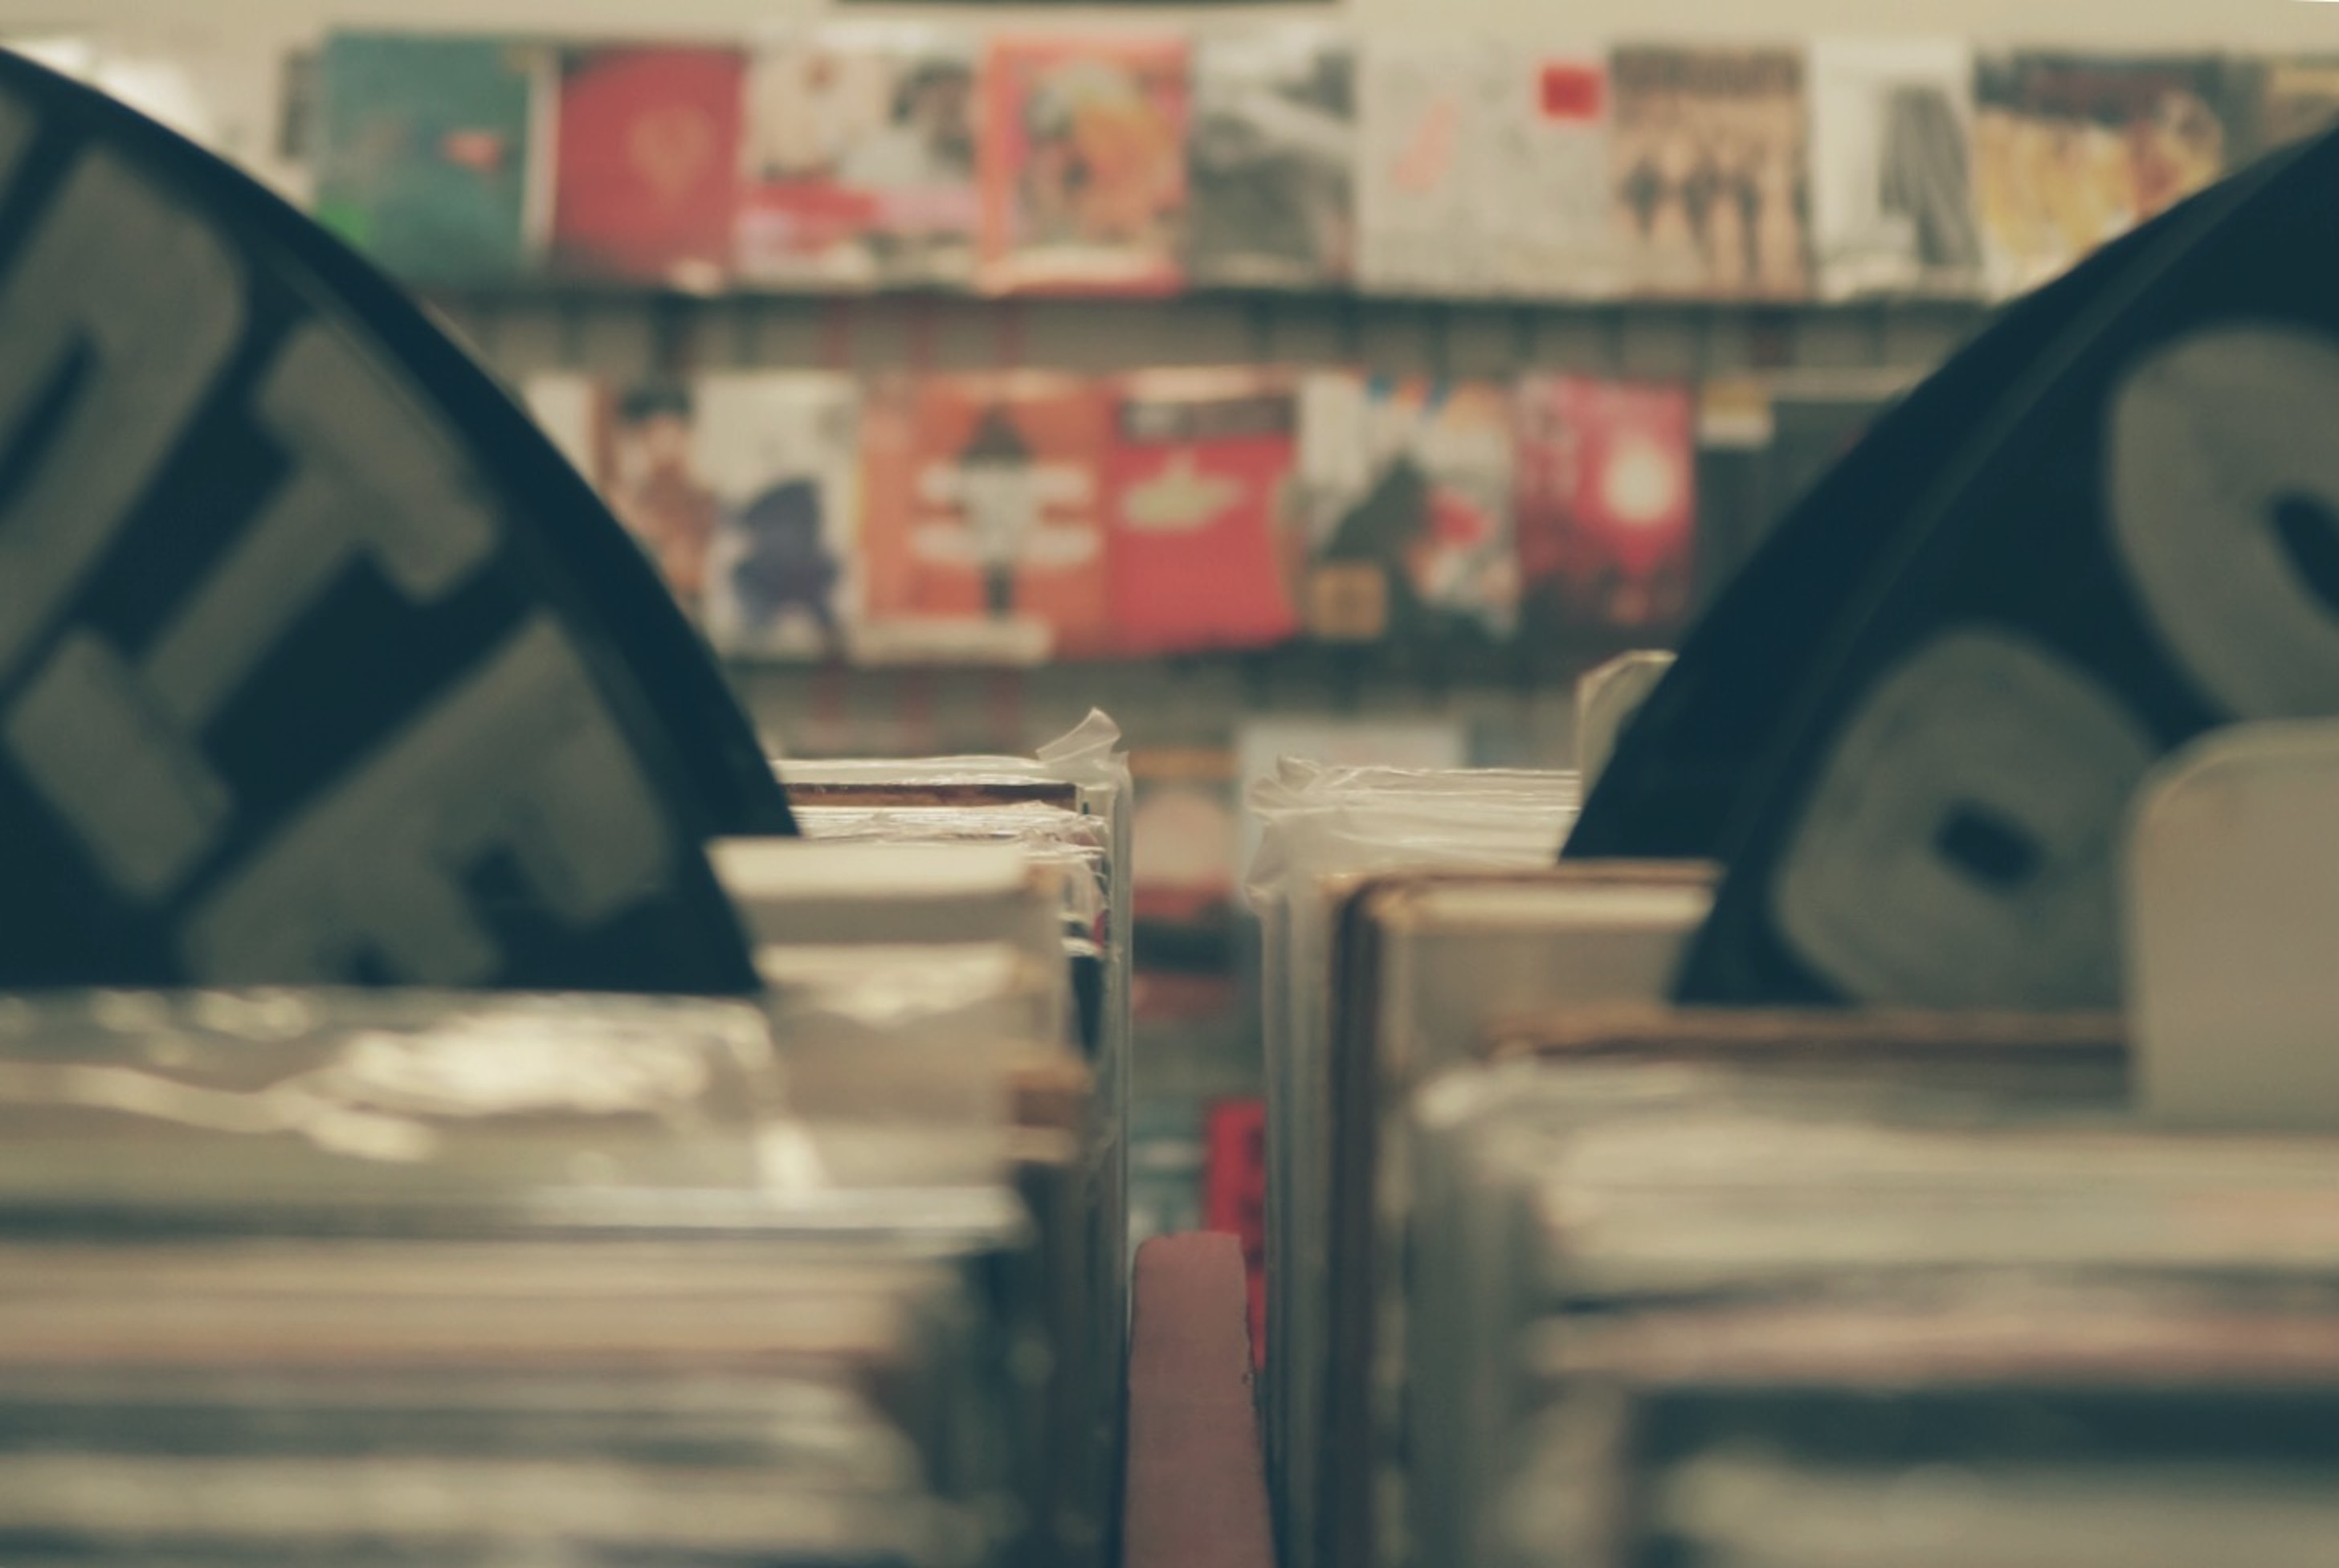 A view of what it looks like between stacks of vinyls at a record store